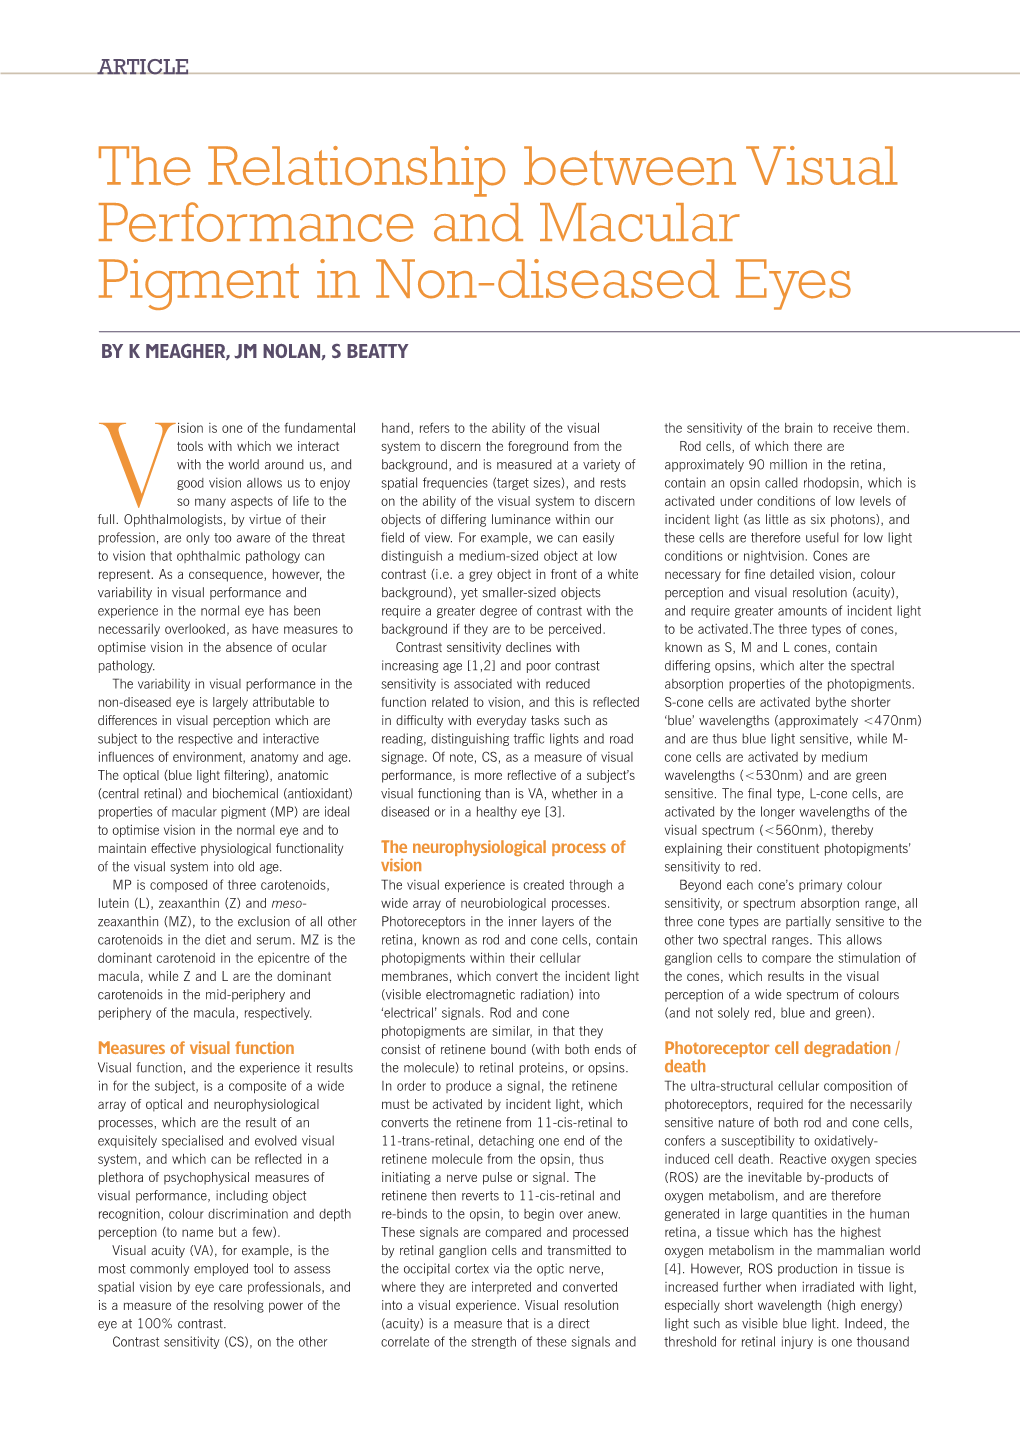 The Relationship Between Visual Performance and Macular Pigment in Non-Diseased Eyes